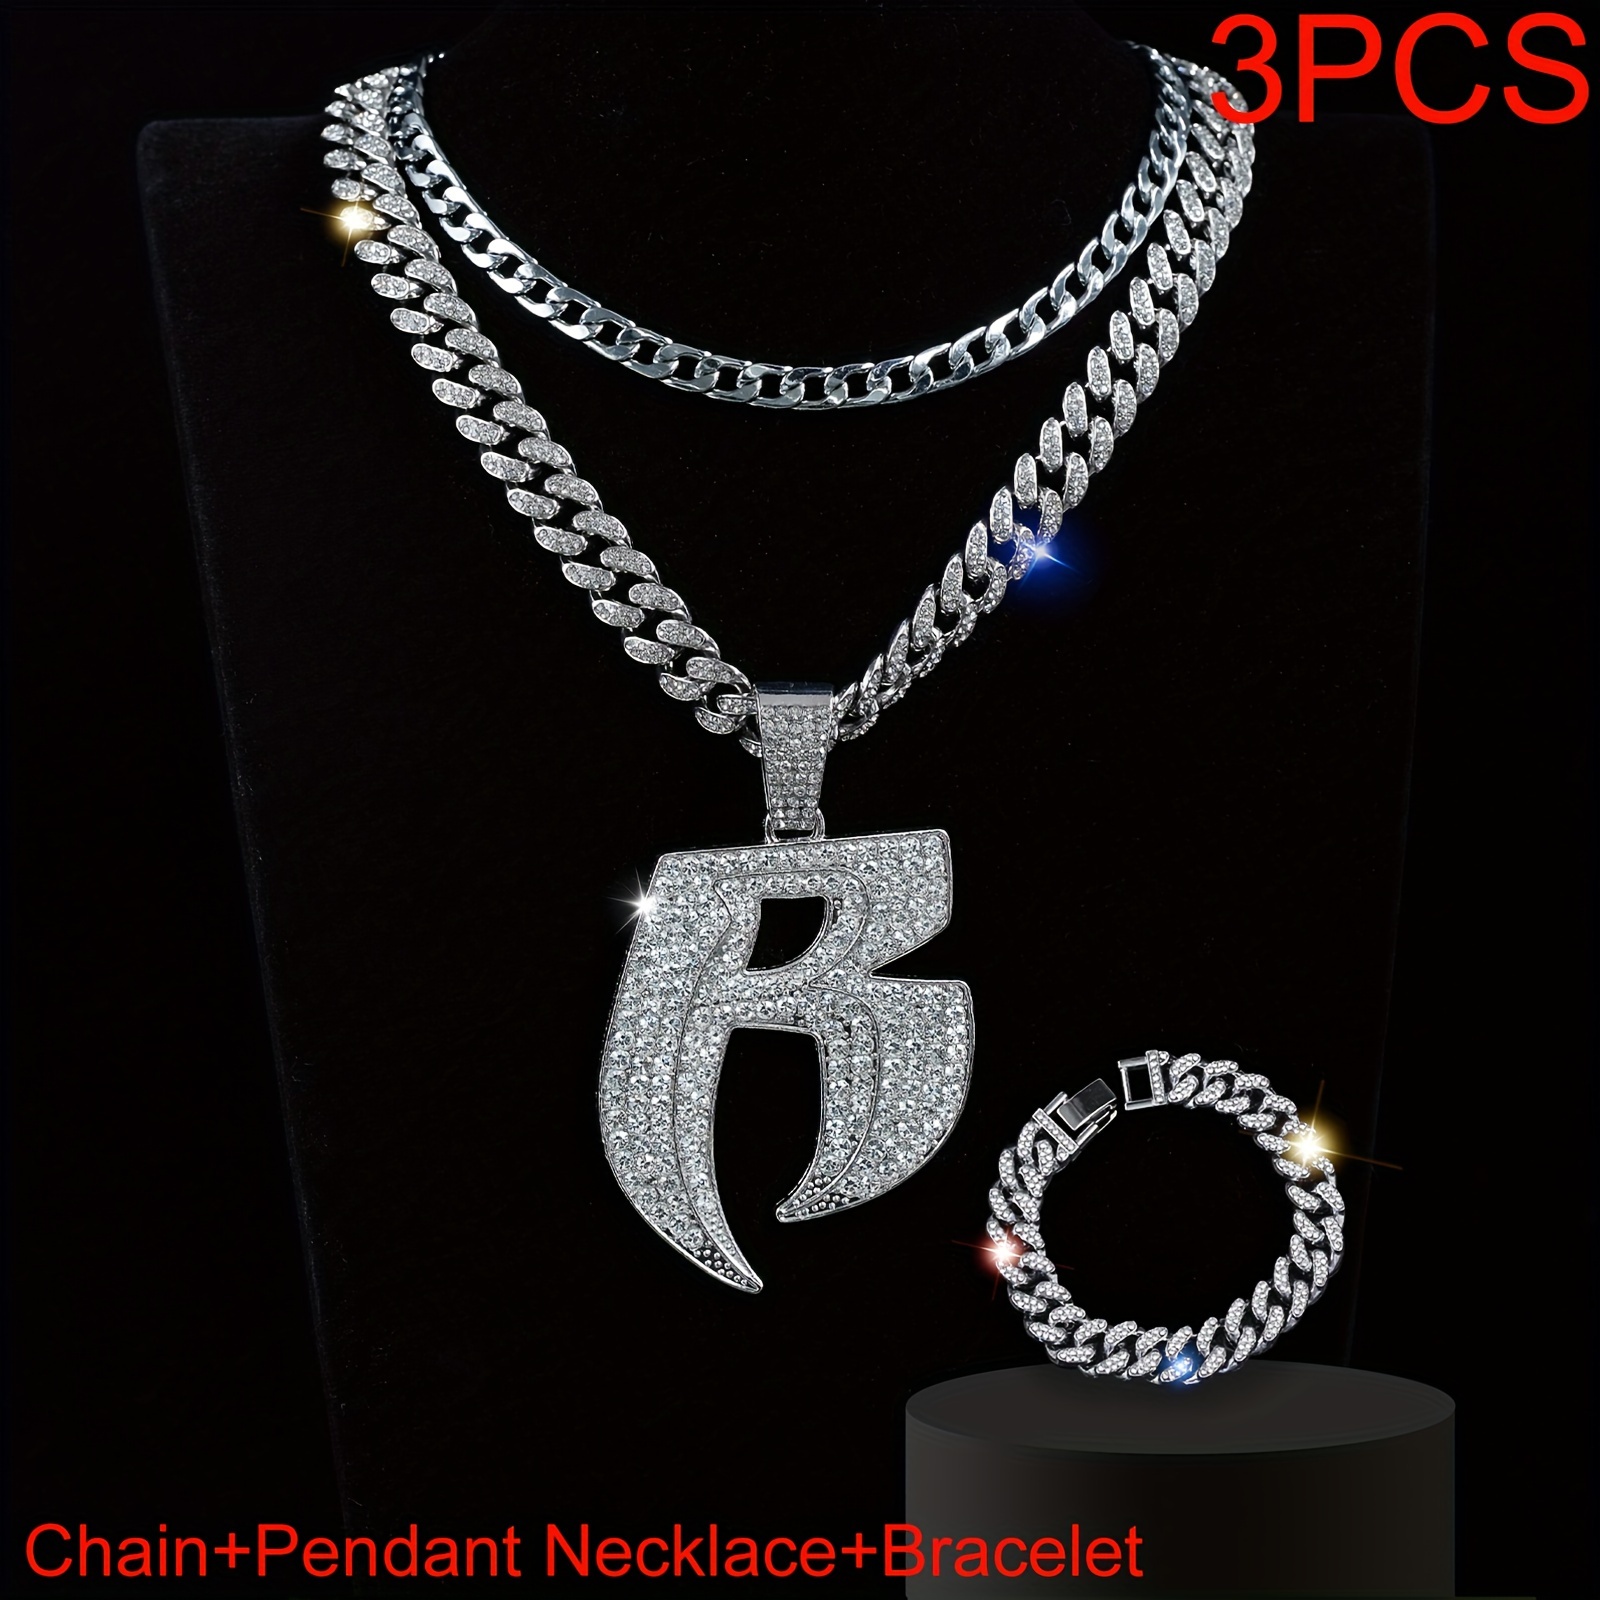 

3pcs Shining Rhinestone Encrusted 'r' Letter Pendant & Ice Cuban Chain Bracelet, Hip-hop Style Necklace For Men And Women, Street Fashion Choker Jewelry Gift